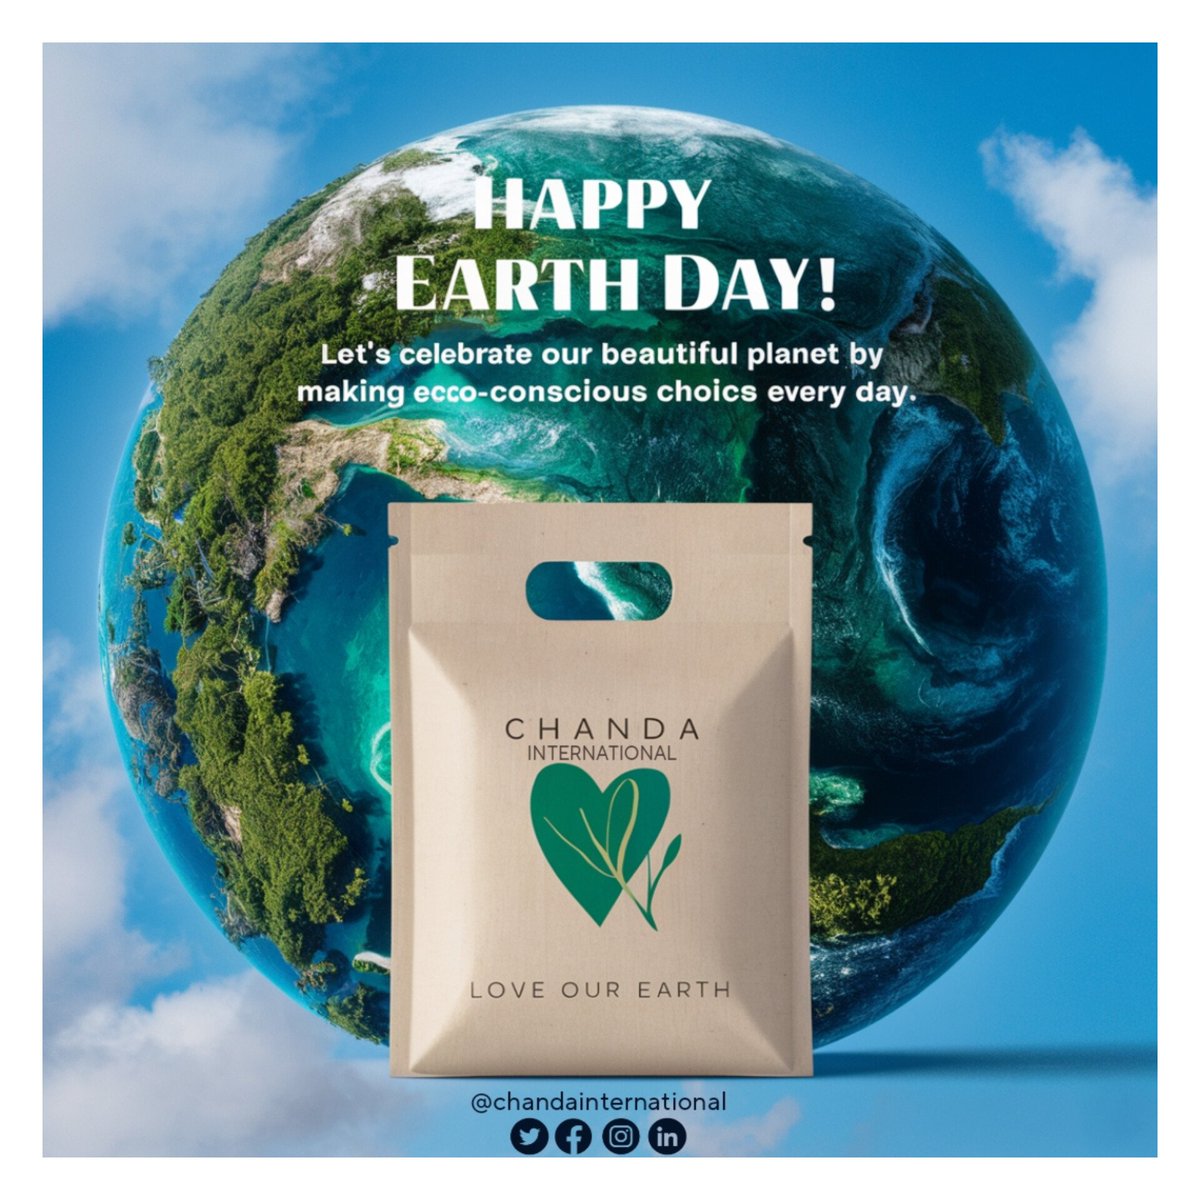 'Happy Earth Day! 🌍
#earthday #ecofriendlypackaging
.
.
 #sustainability #sustainblefuture #greenrevolution #sustainable #ecofriendly #happyearthday🌎 #happyearthday #earth #environment #environmental #natural #import #international #exporter #exportquality #explore #explorepage